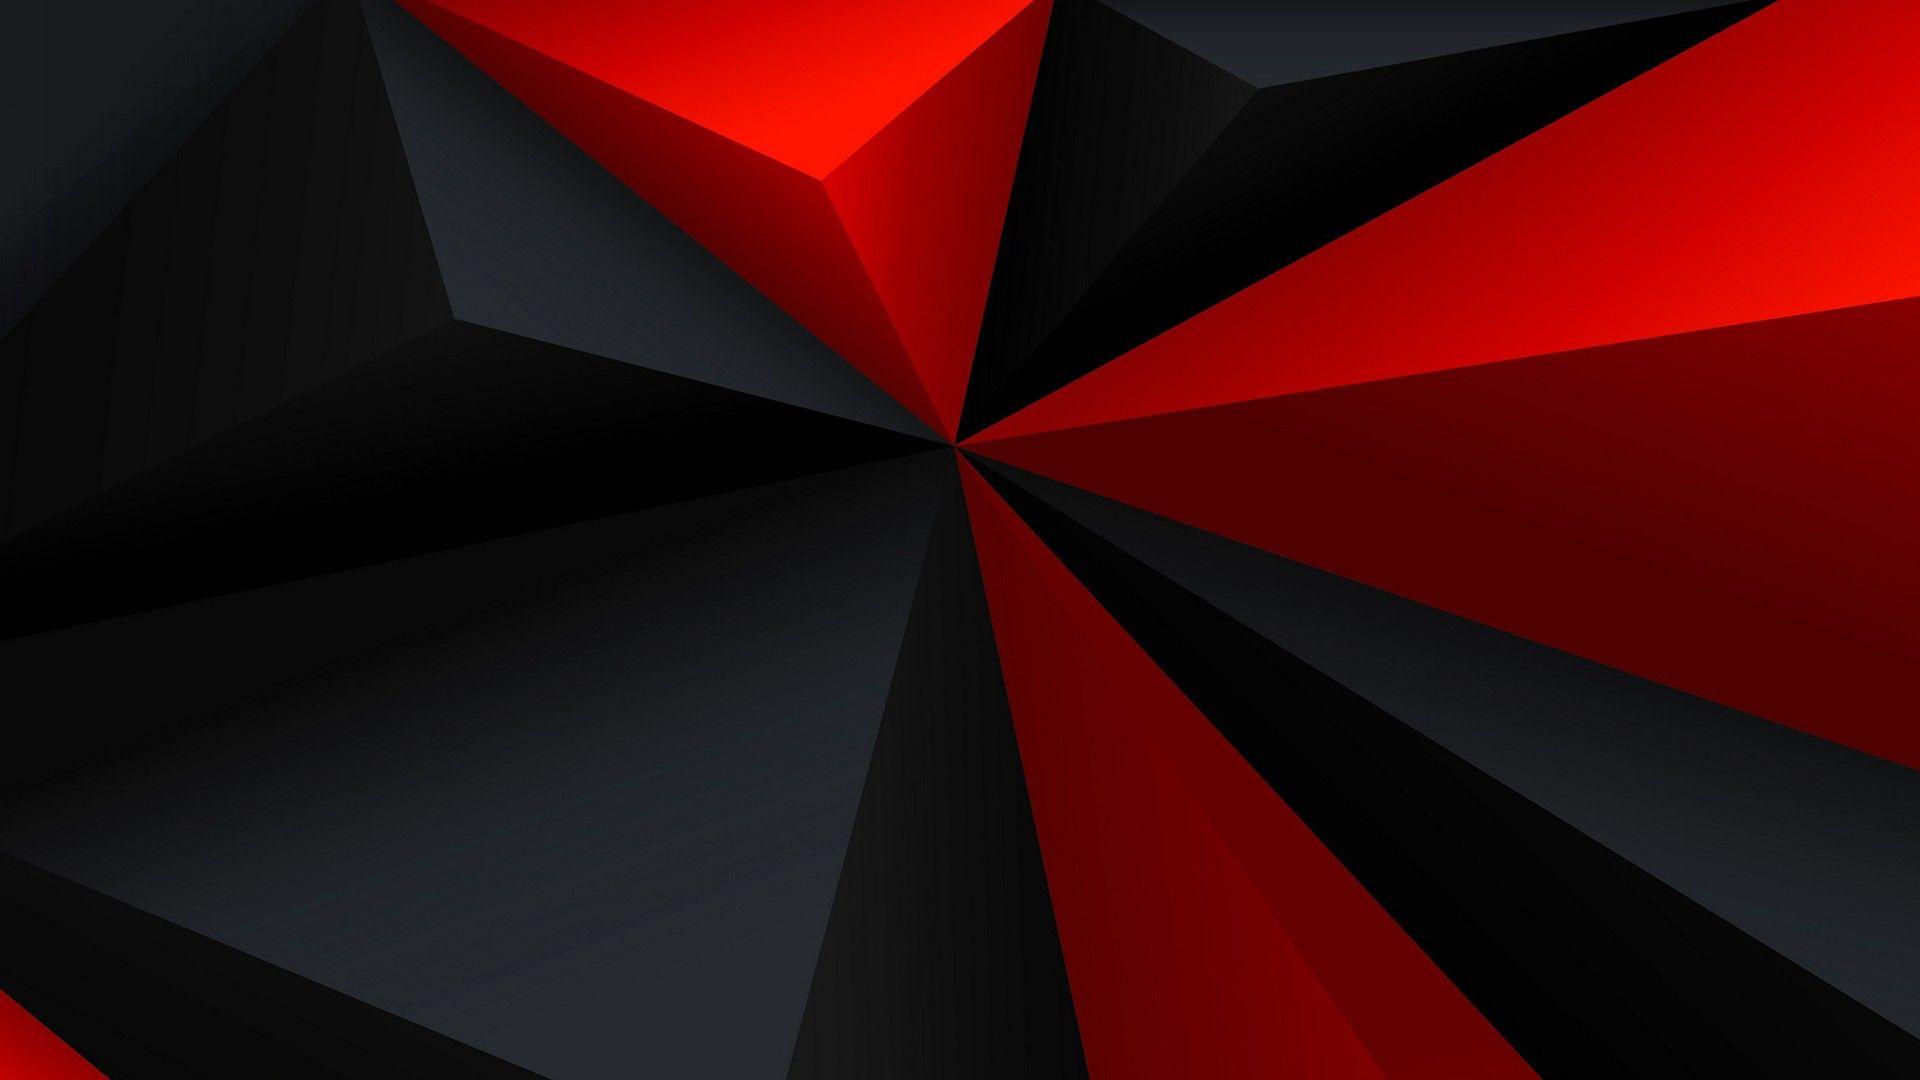 1824x2736px  free download  HD wallpaper red and gray wallpaper  Abstract Shapes backgrounds full frame  Wallpaper Flare